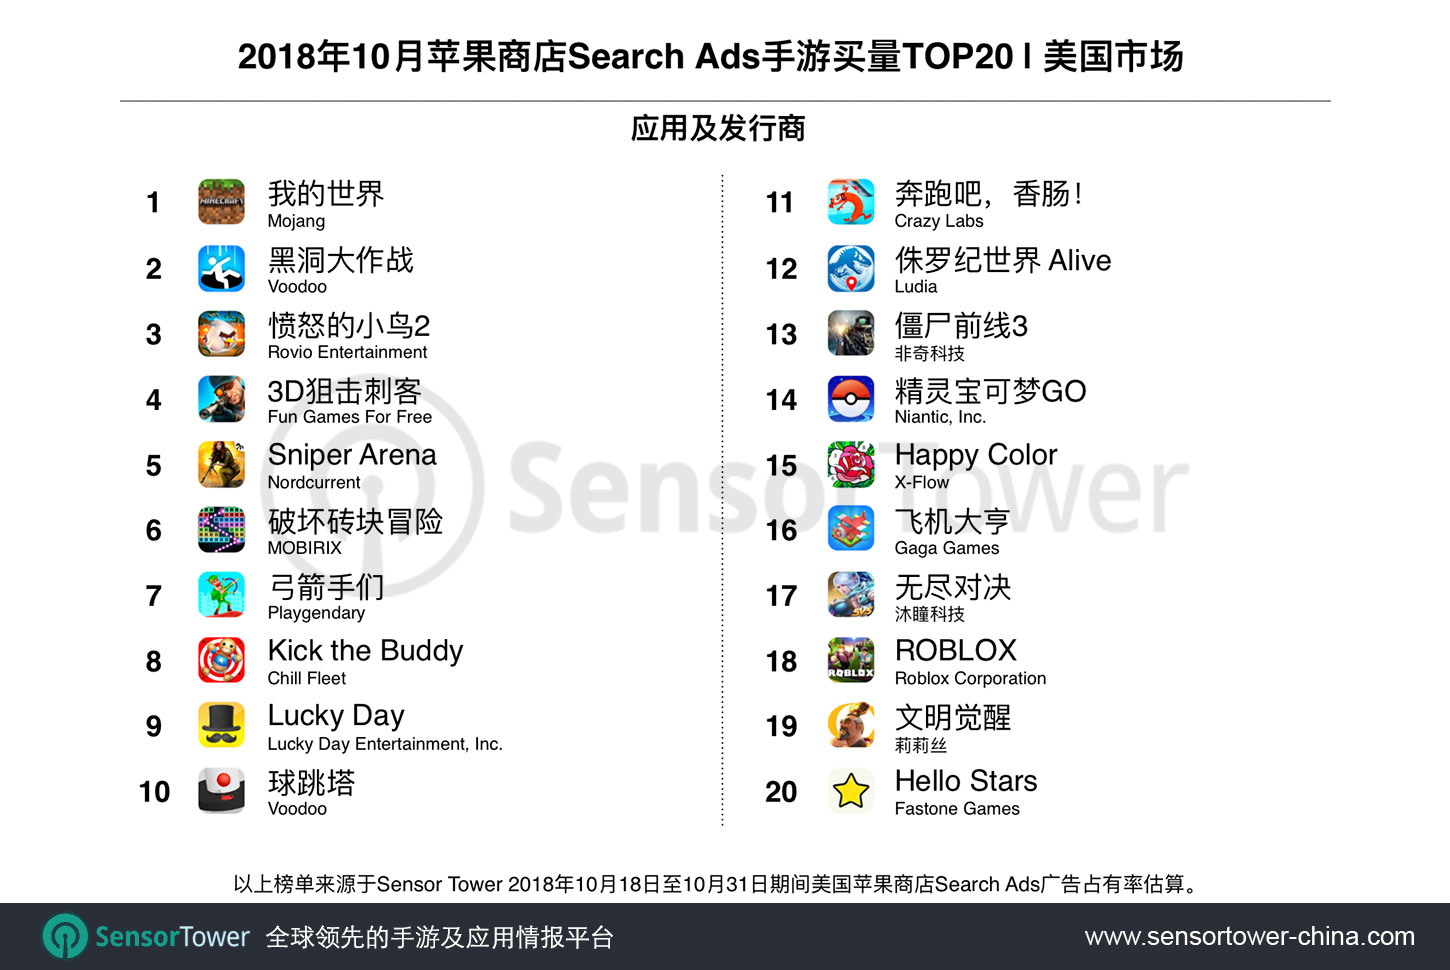 October 2018 Top Game Advertisers on U.S. App Store Search Ads by Share of Voice